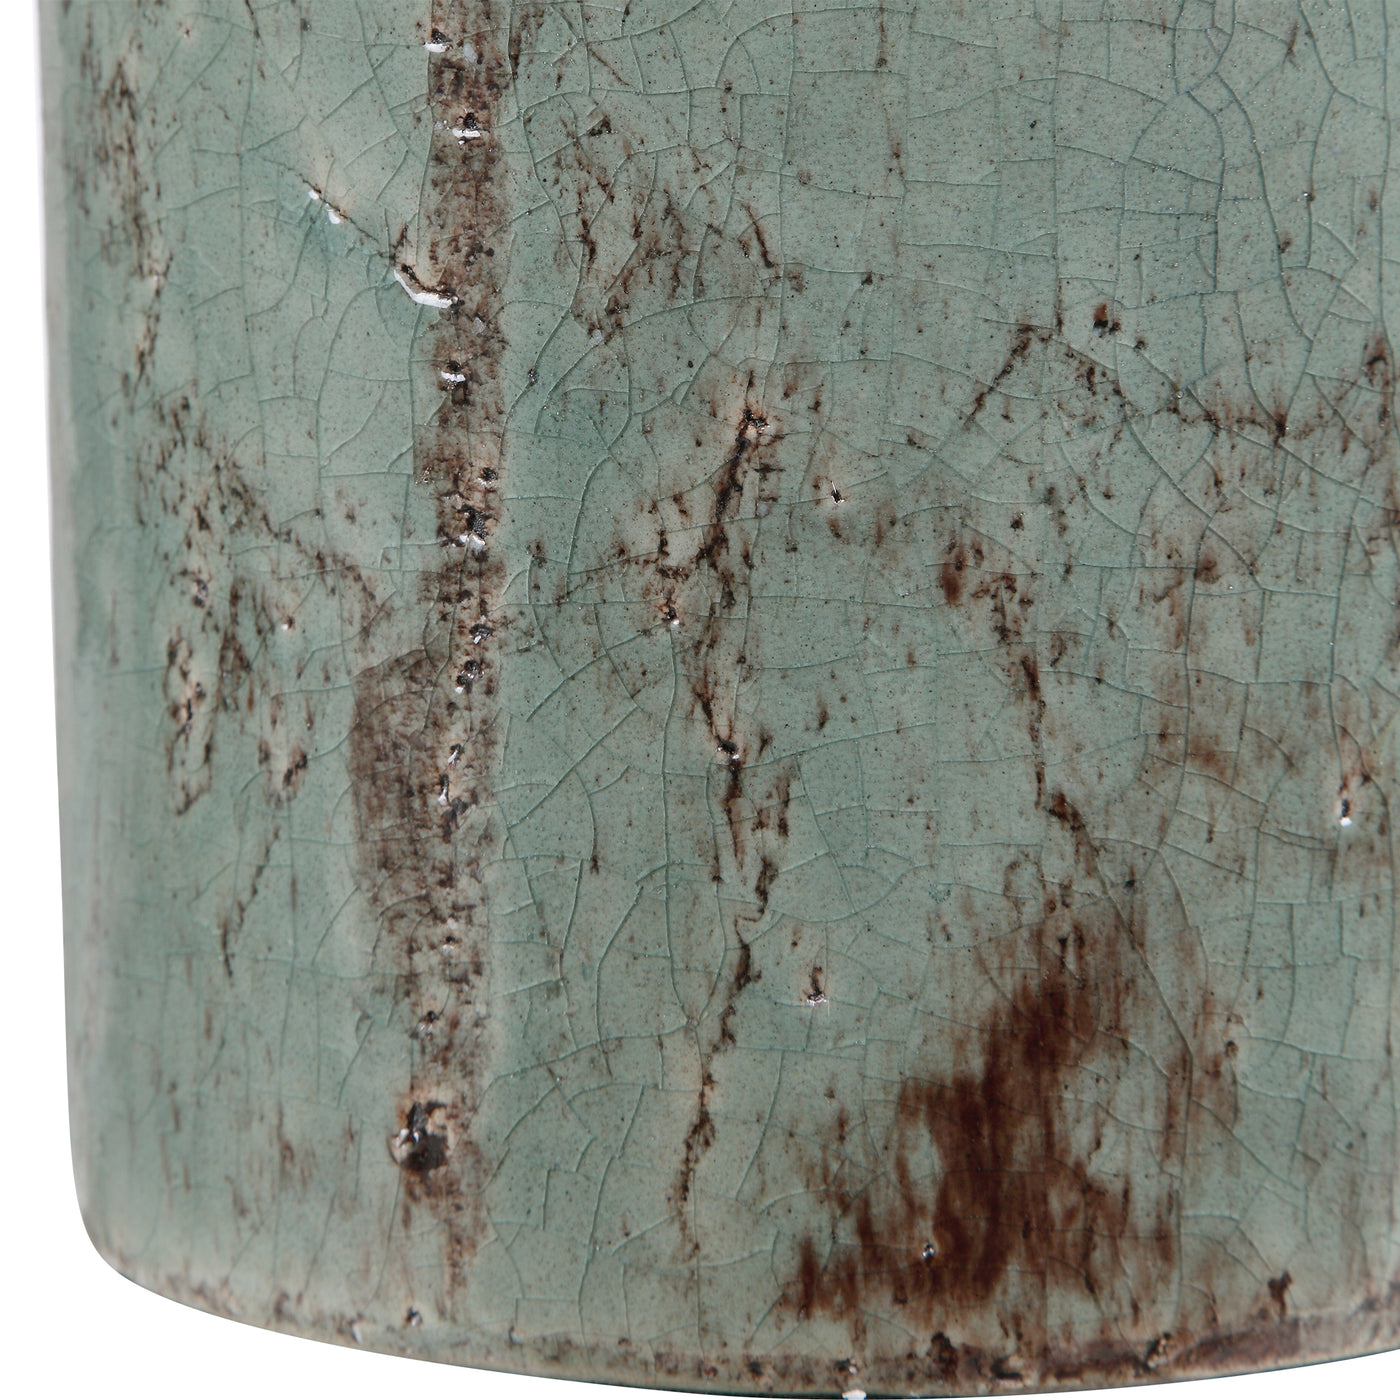 Ceramic Table Lamp Finished In A Crackled Aqua Blue Glaze With Dark Rustic Bronze Distressing, Accented With Light Antique...